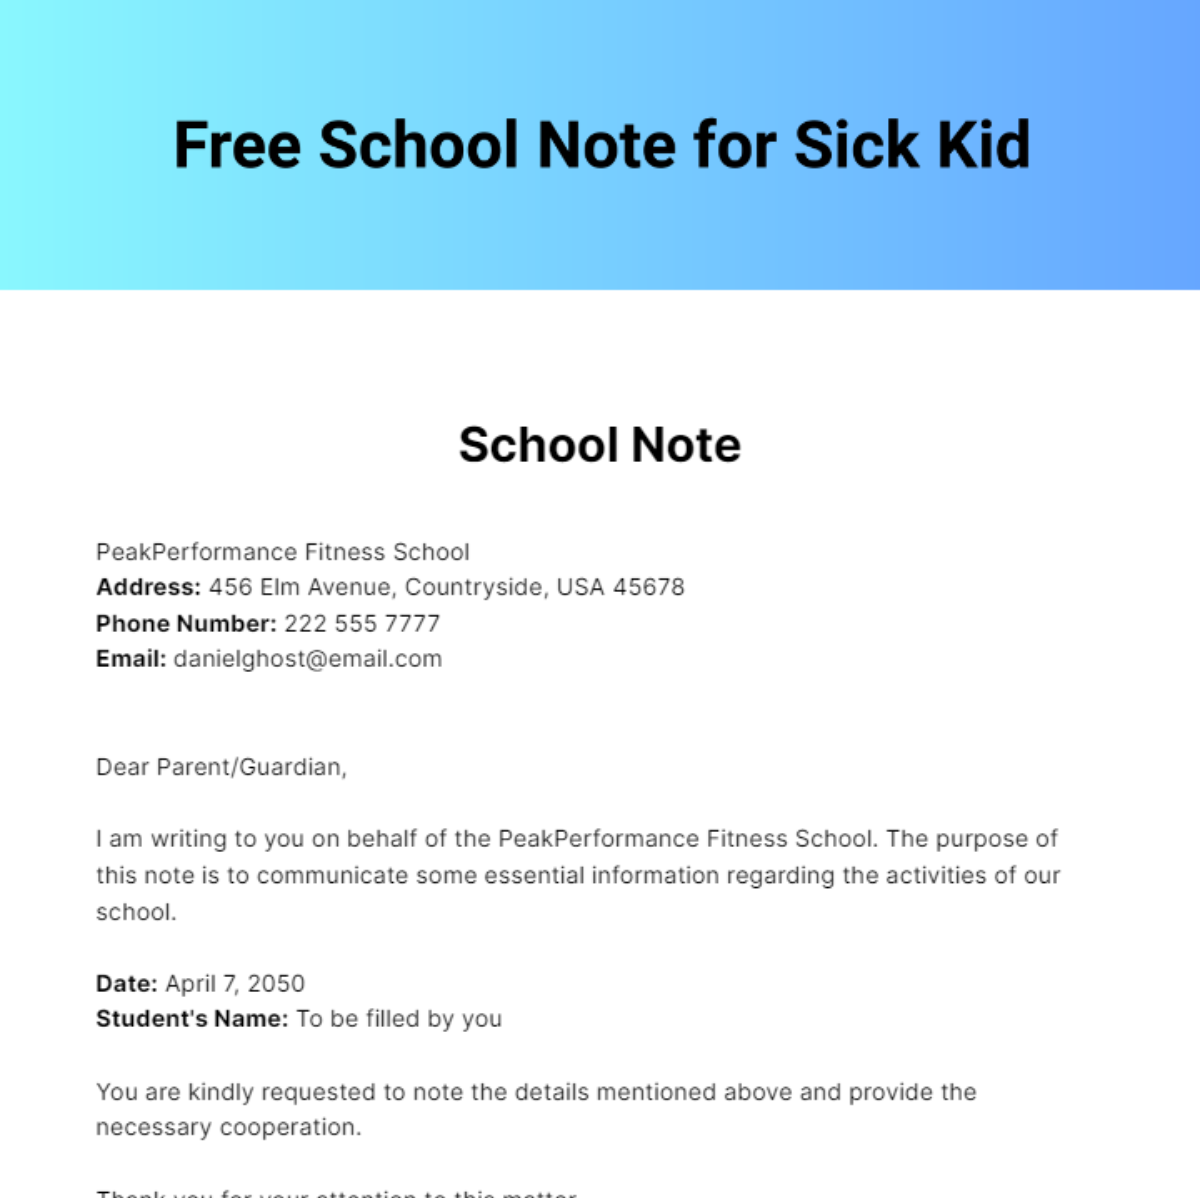 Free School Note for Sick Kid Template